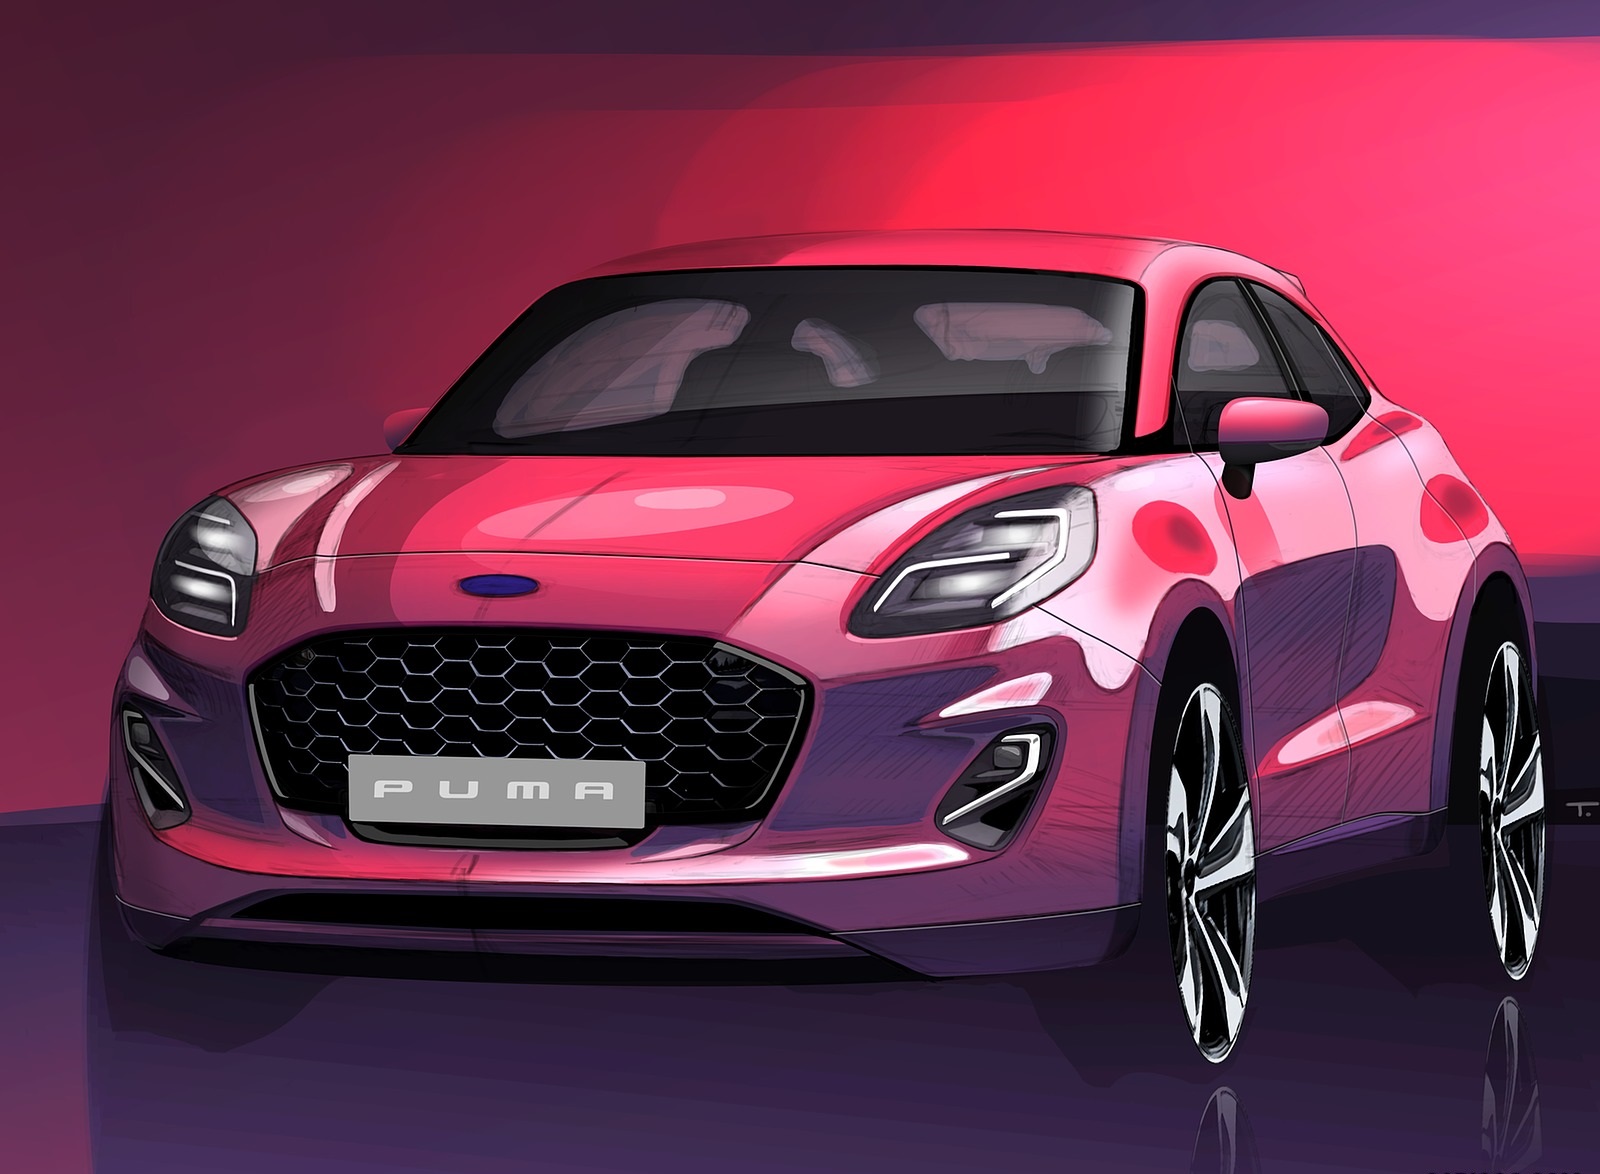 2020 Ford Puma Design Sketch Wallpapers #40 of 50